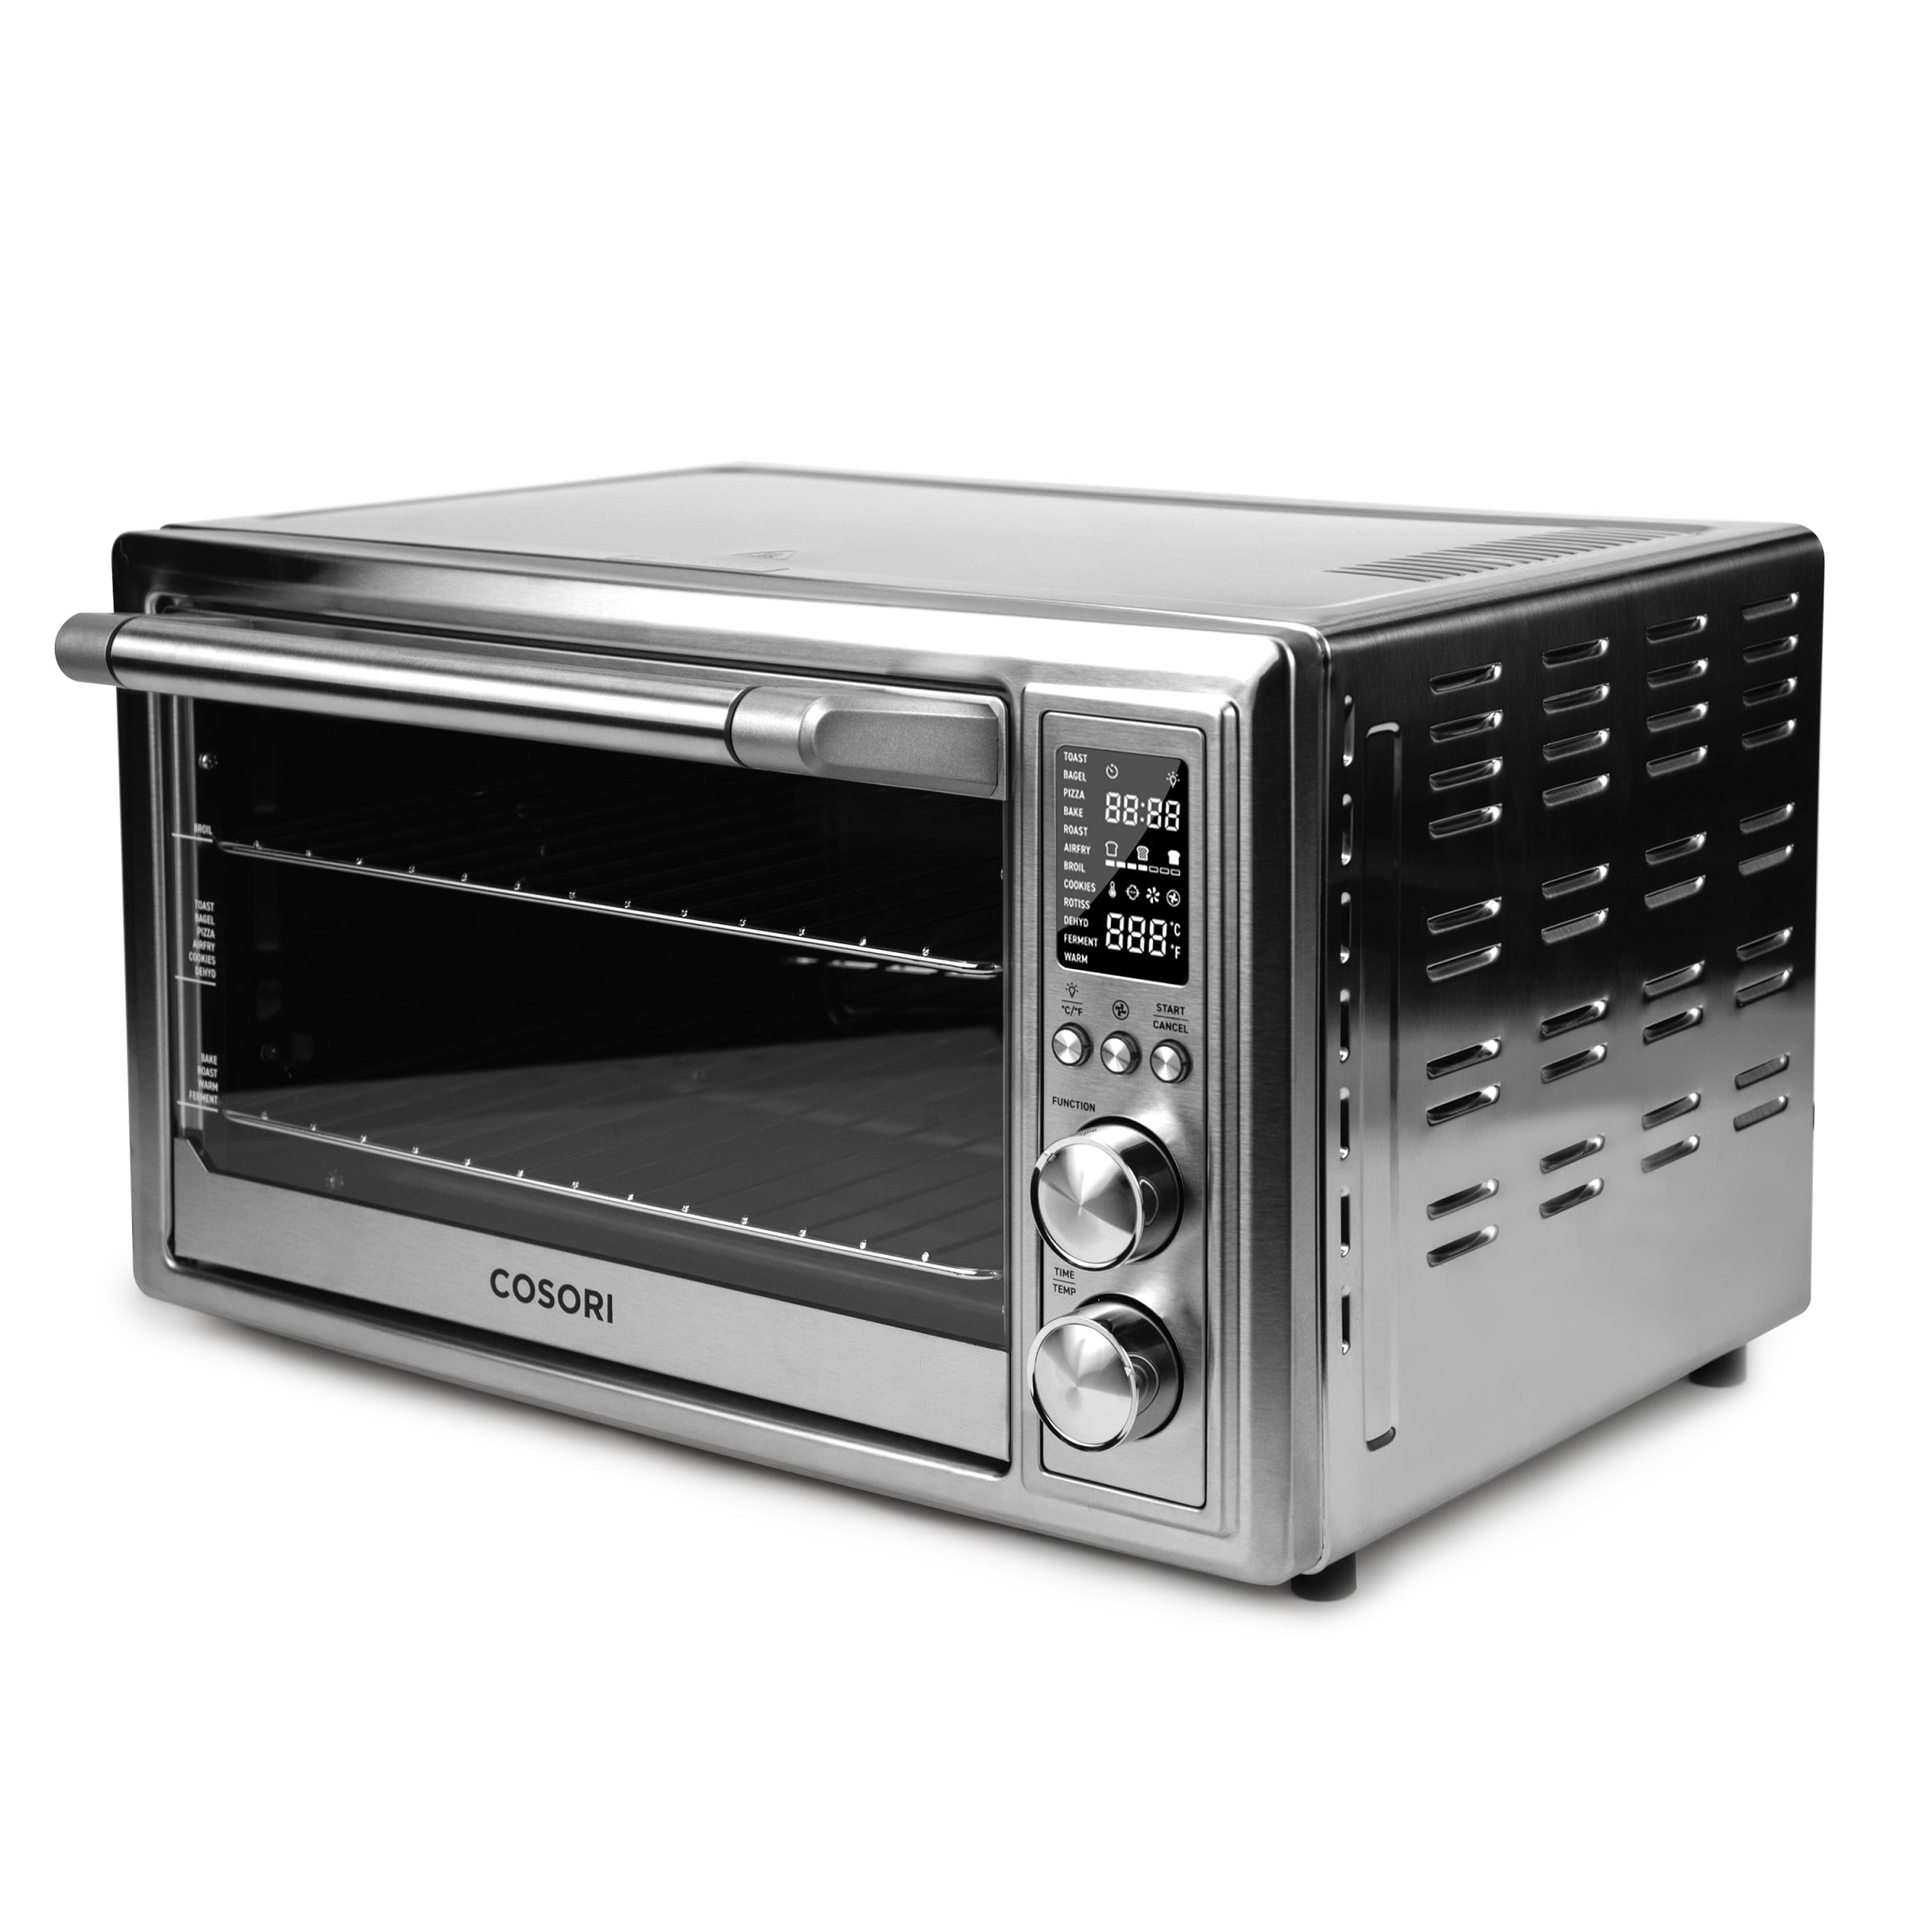 COSORI Air Fryer Toaster Oven, 12-in-1 Convection Ovens with Rotisserie &  Dehydrator, Stainless Steel, 6-Slice Toast, 100 Recipes & 6 Accessories  Incl for Sale in Rosemead, CA - OfferUp